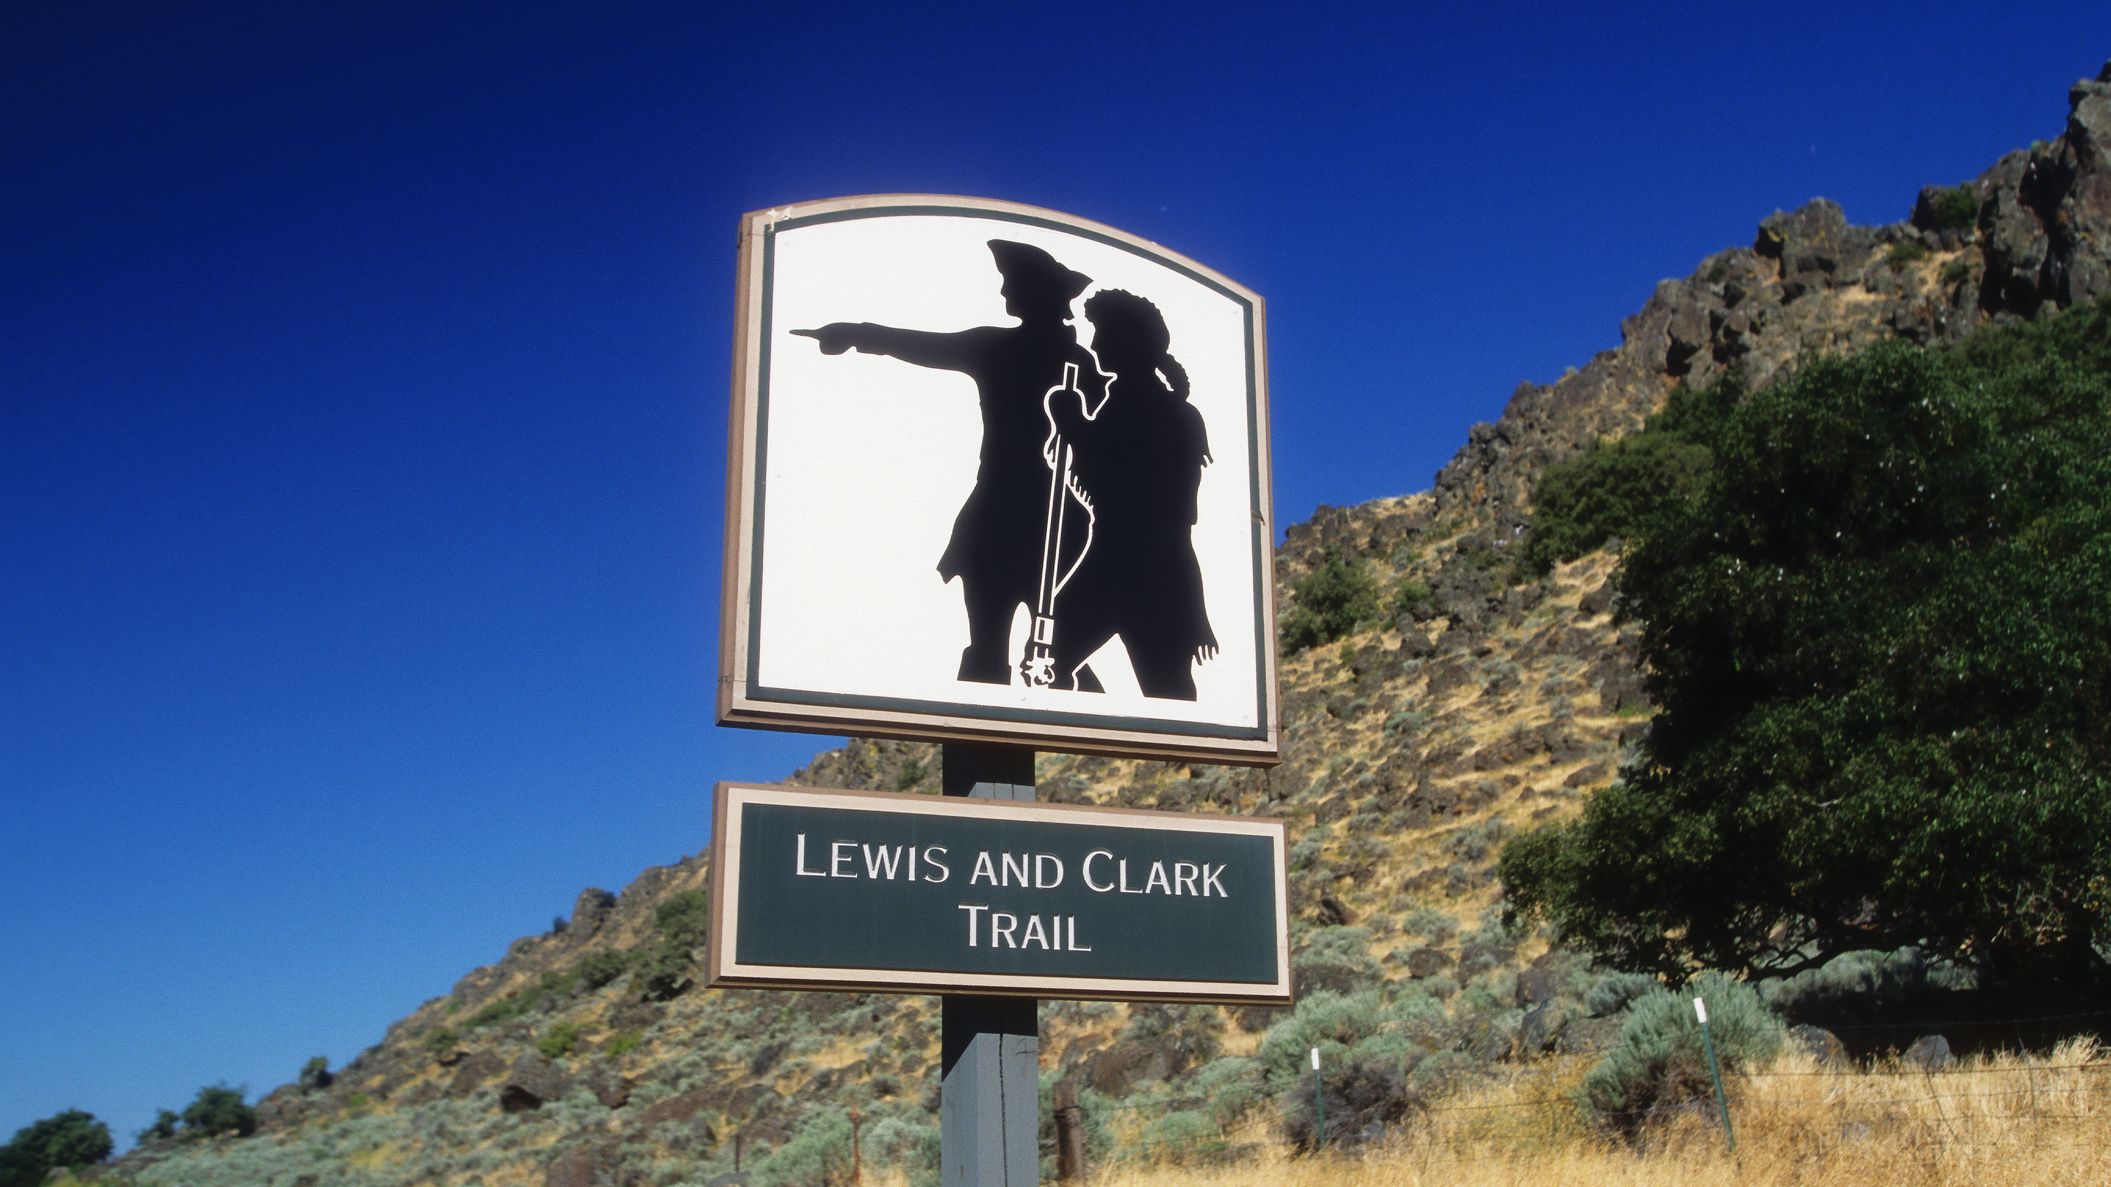 History of the Lewis and Clark Expedition